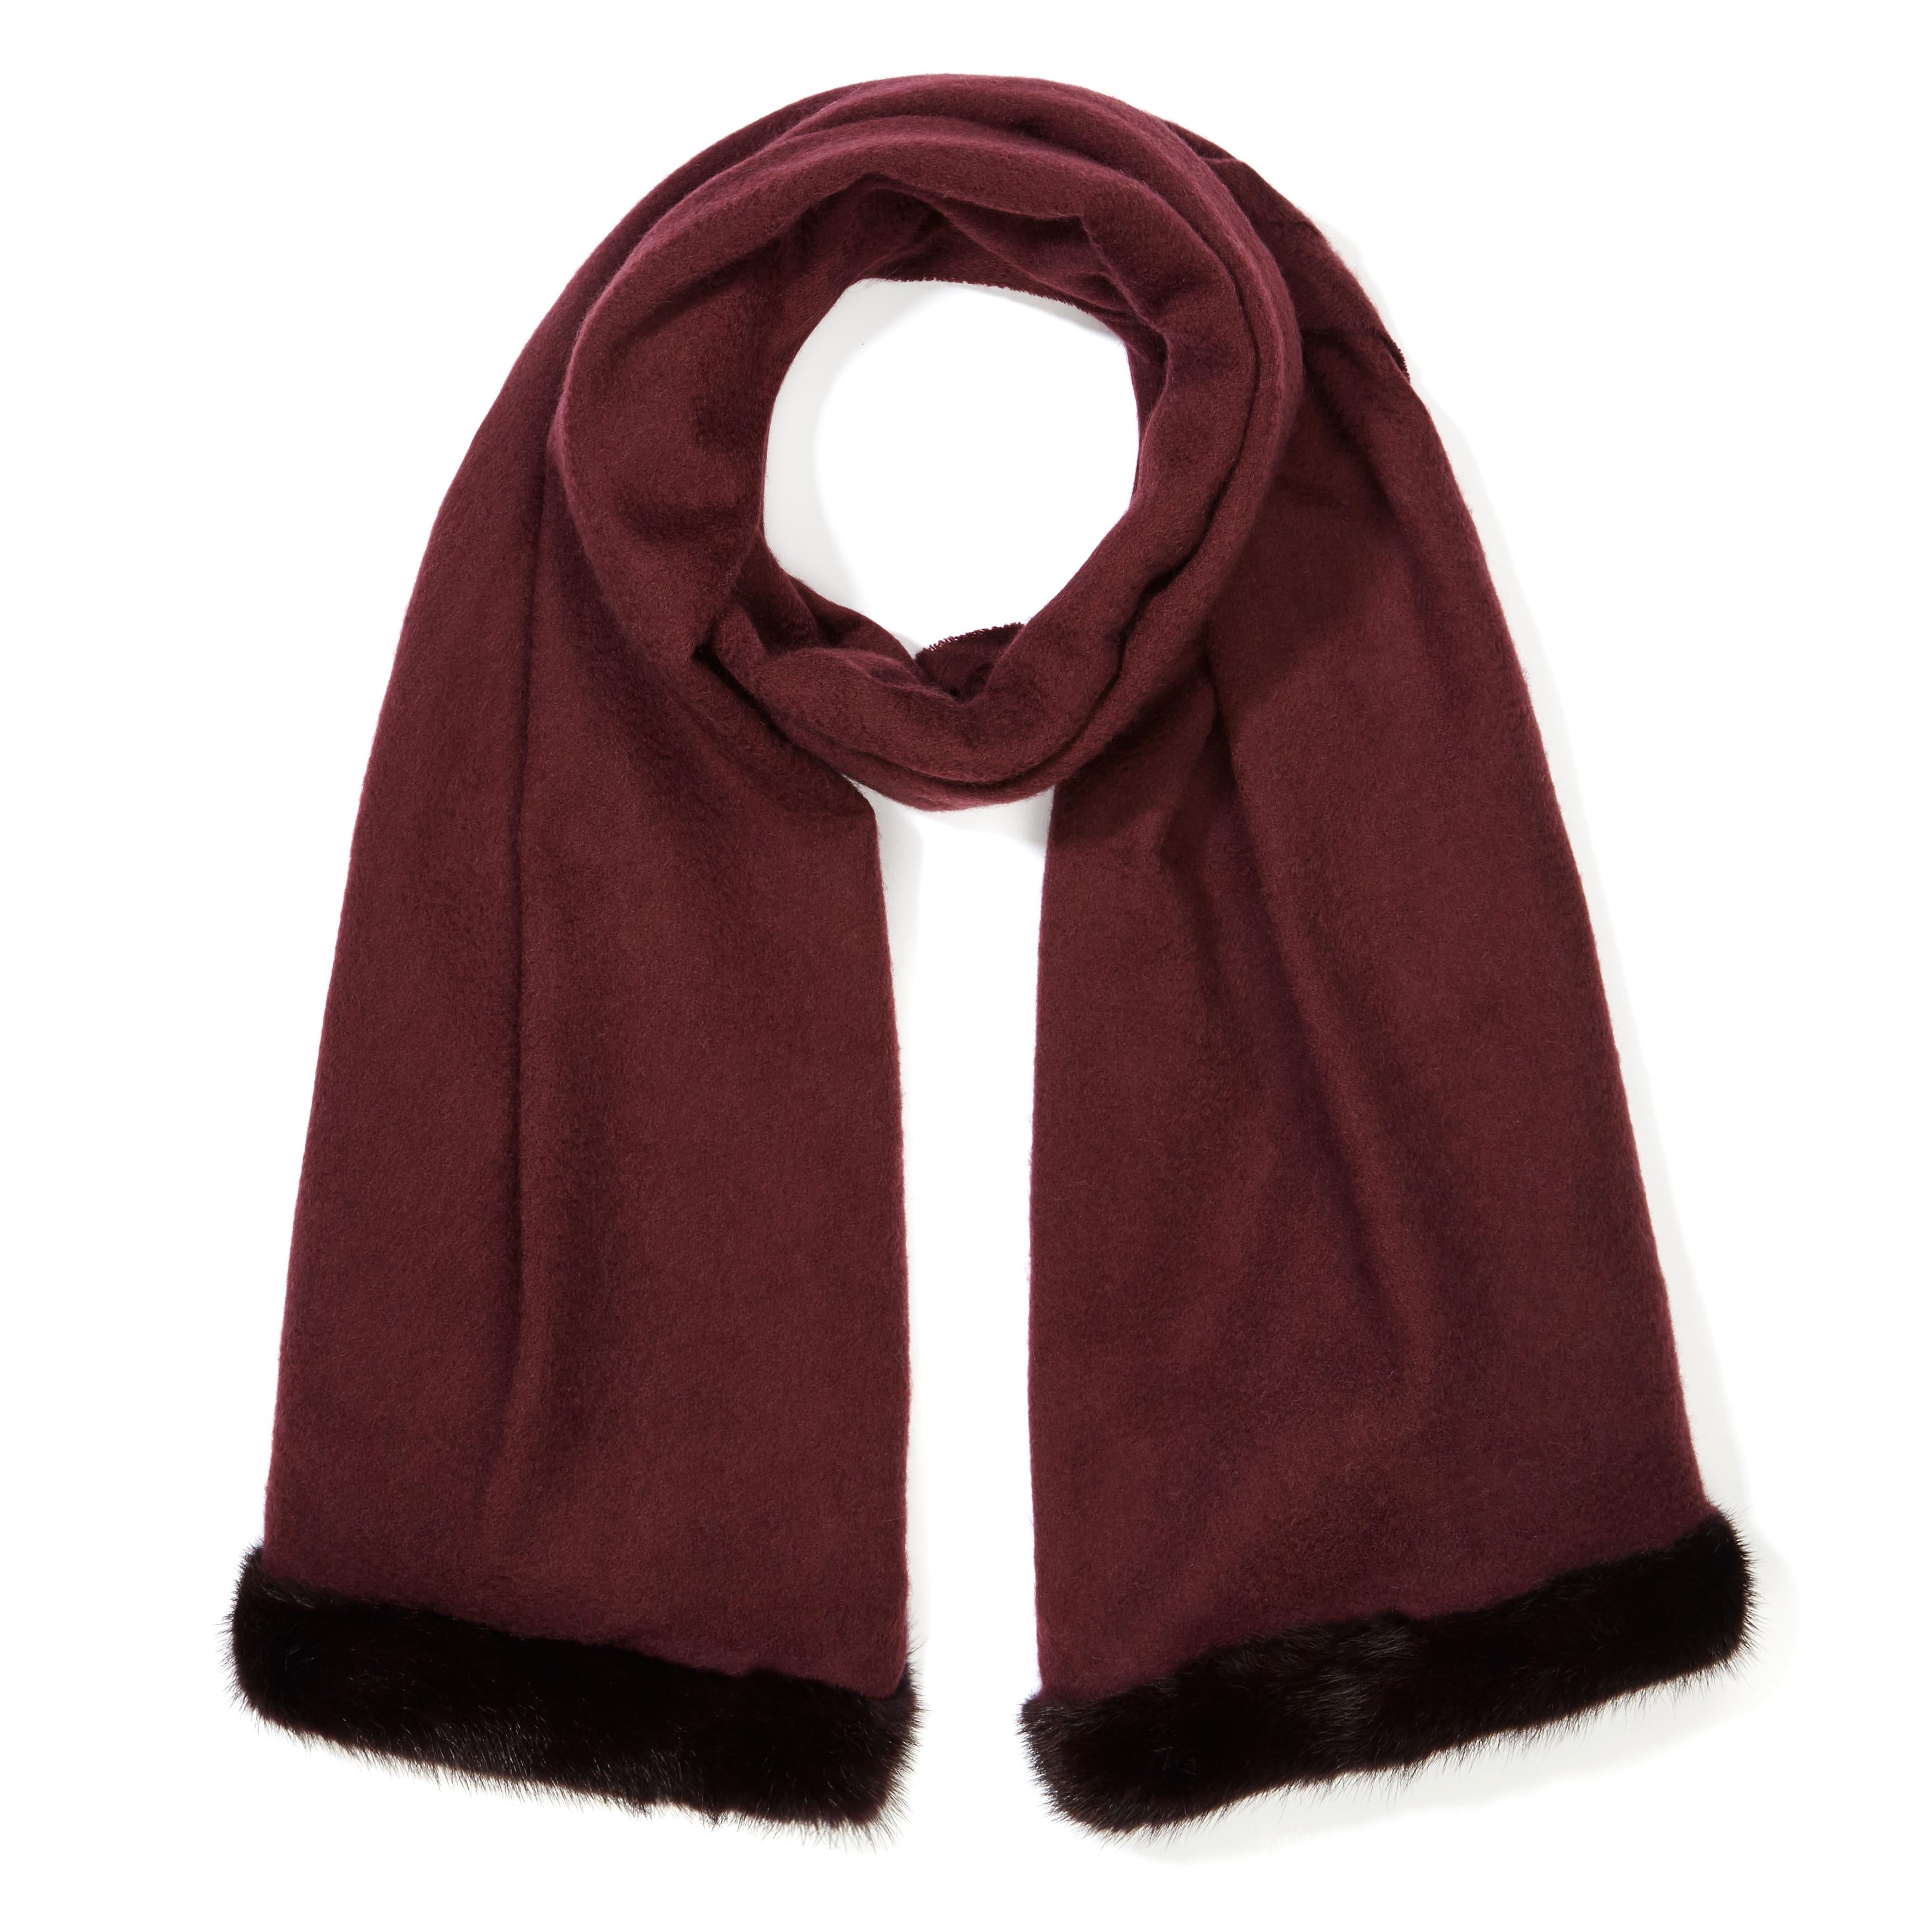 Verheyen London Mink Fur Trimmed Cashmere Shawl Scarf in Rich Burgundy - New

Verheyen London’s shawl is spun from the finest Scottish woven cashmere and finished with the most exquisite dyed mink. Its warmth envelopes you with luxury, perfect for